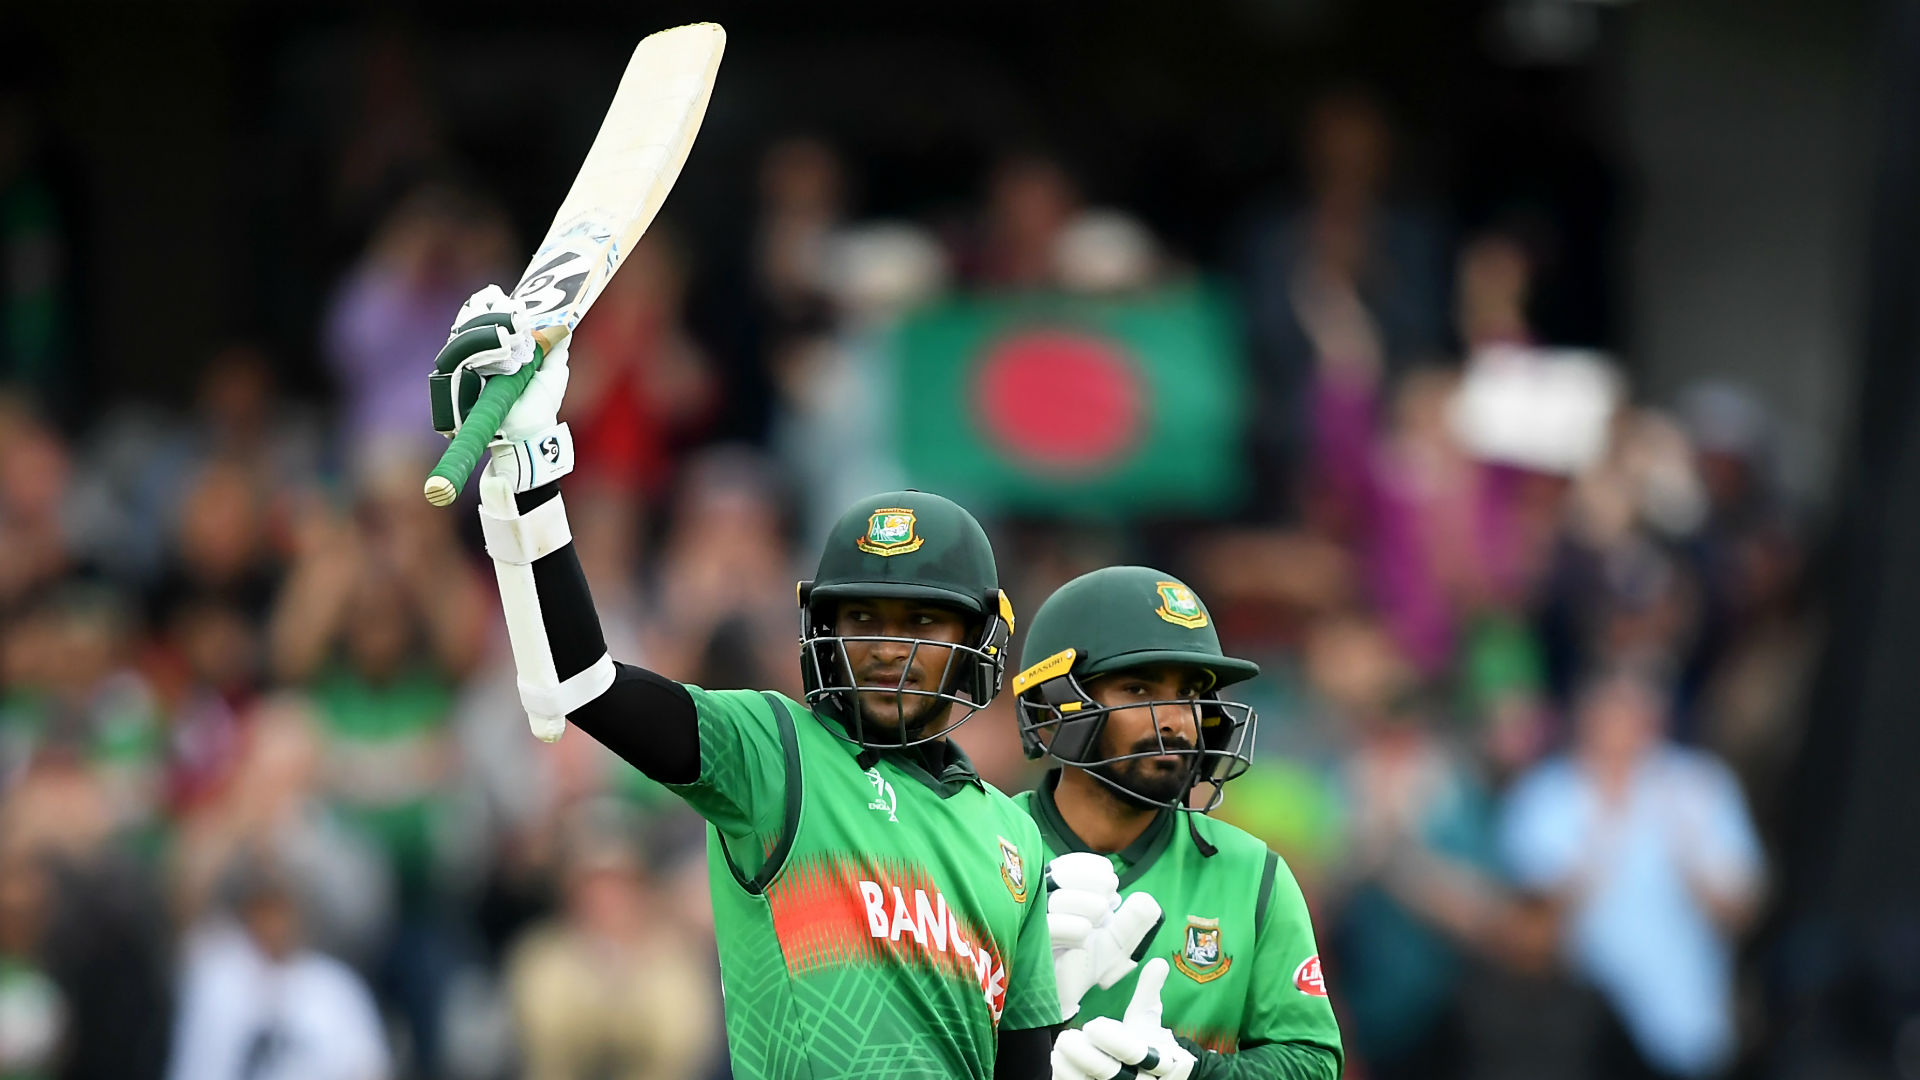 Shakib Al Hasan made a vital unbeaten 70 to see off Afghanistan and give Bangladesh a boost ahead of the T20 tri-series final.